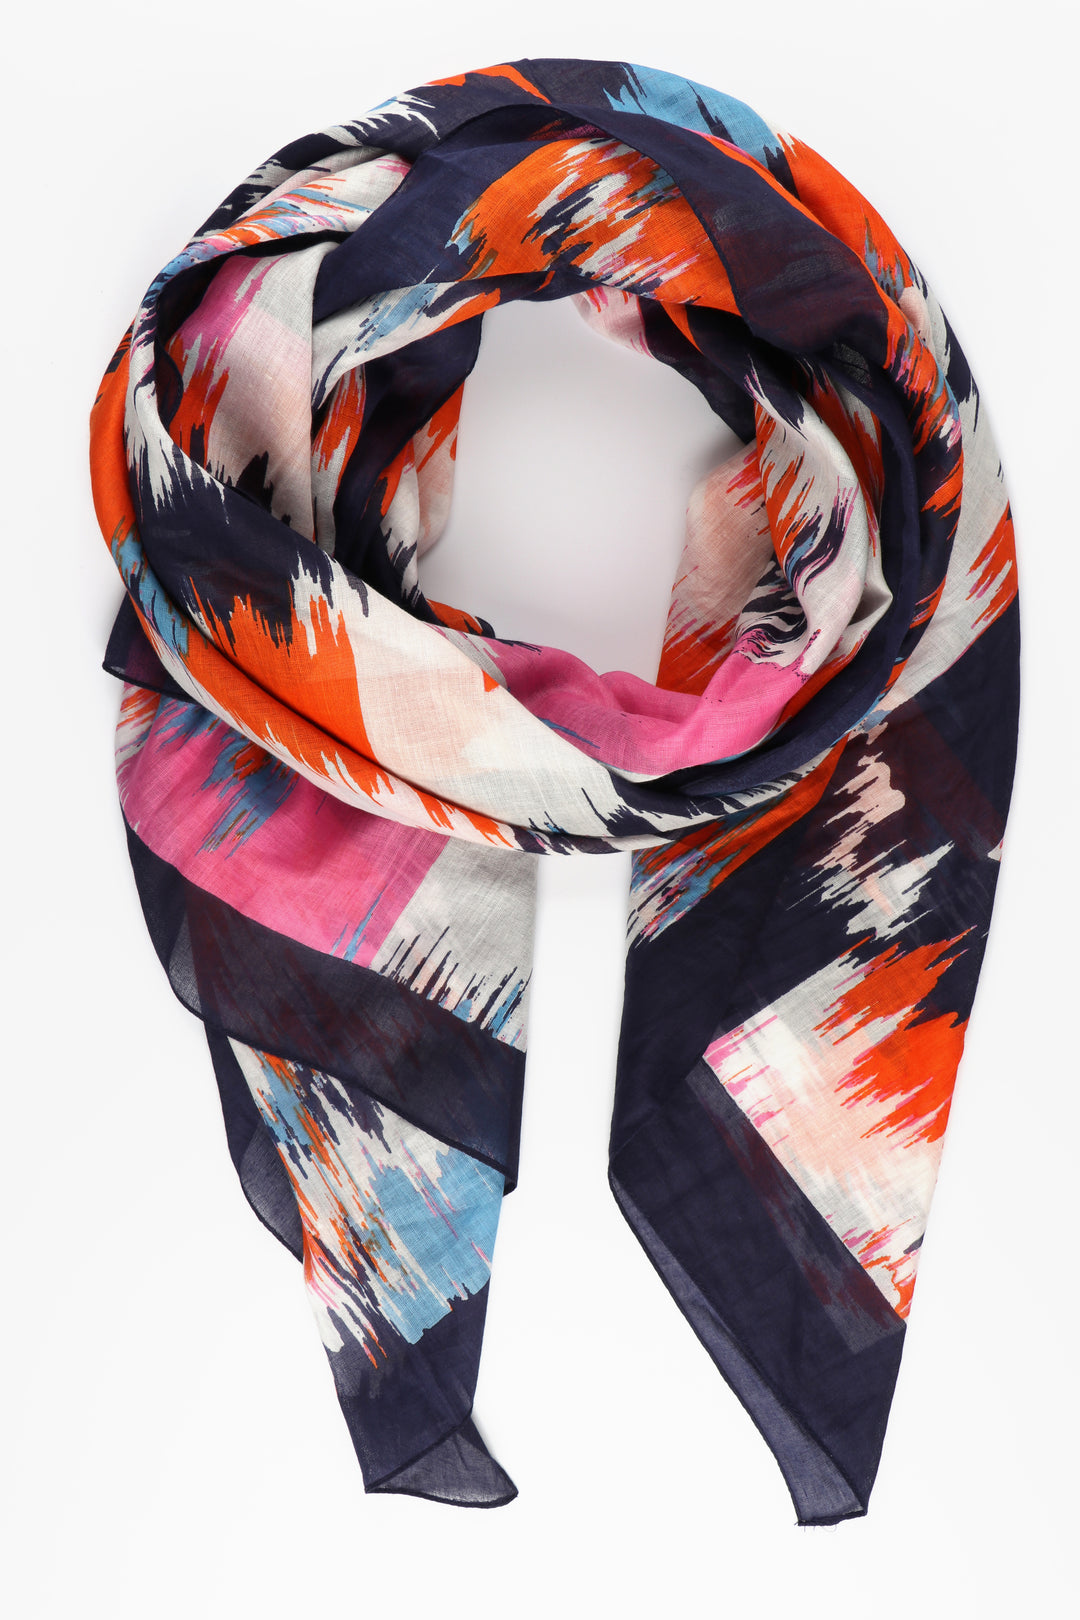 abstract pattern cotton scarf with a navy blue border and an all over pattern featuring orange, pink and white abstract chevrons